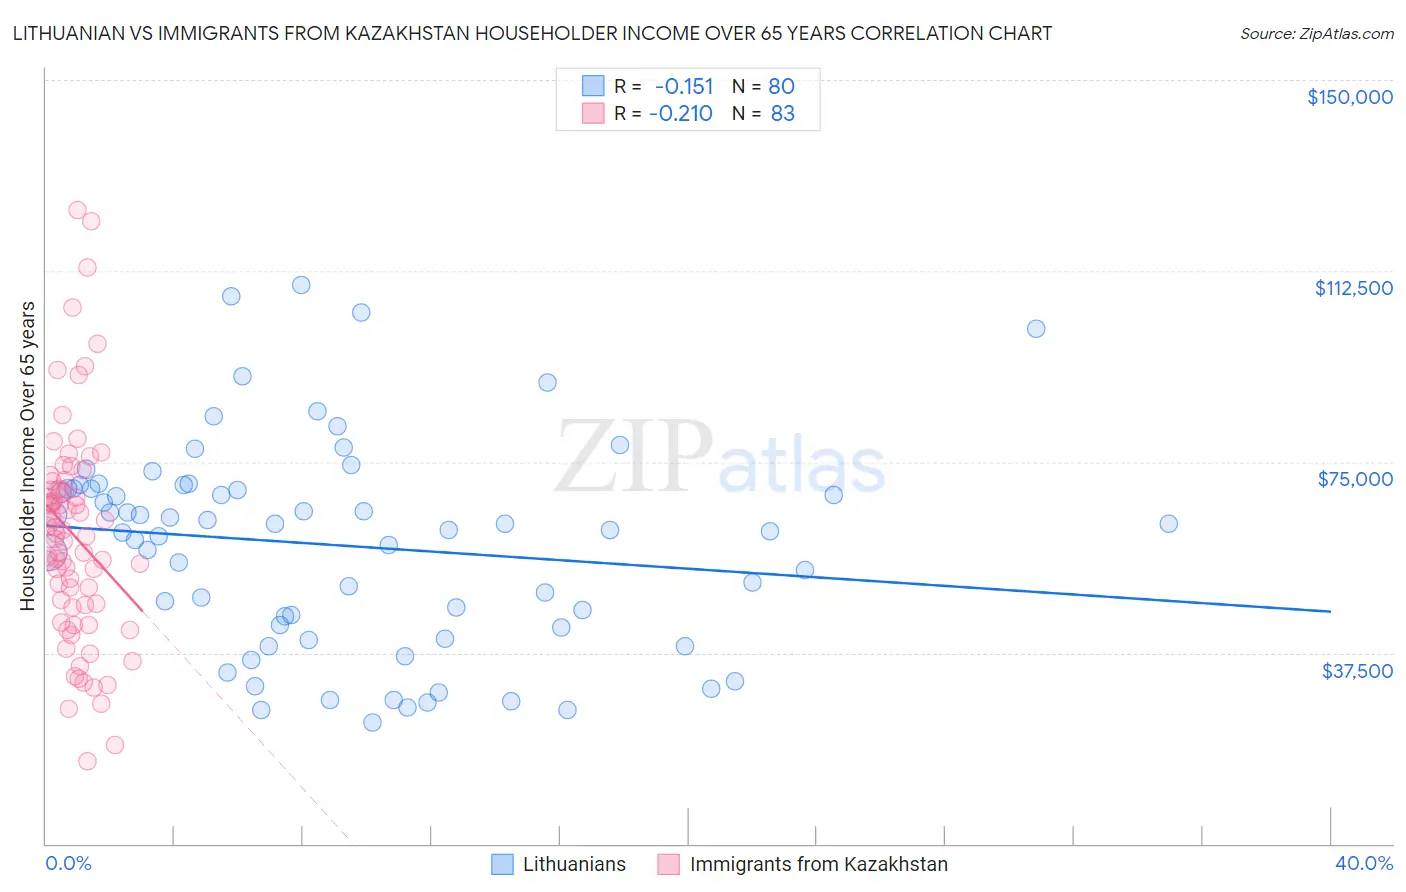 Lithuanian vs Immigrants from Kazakhstan Householder Income Over 65 years